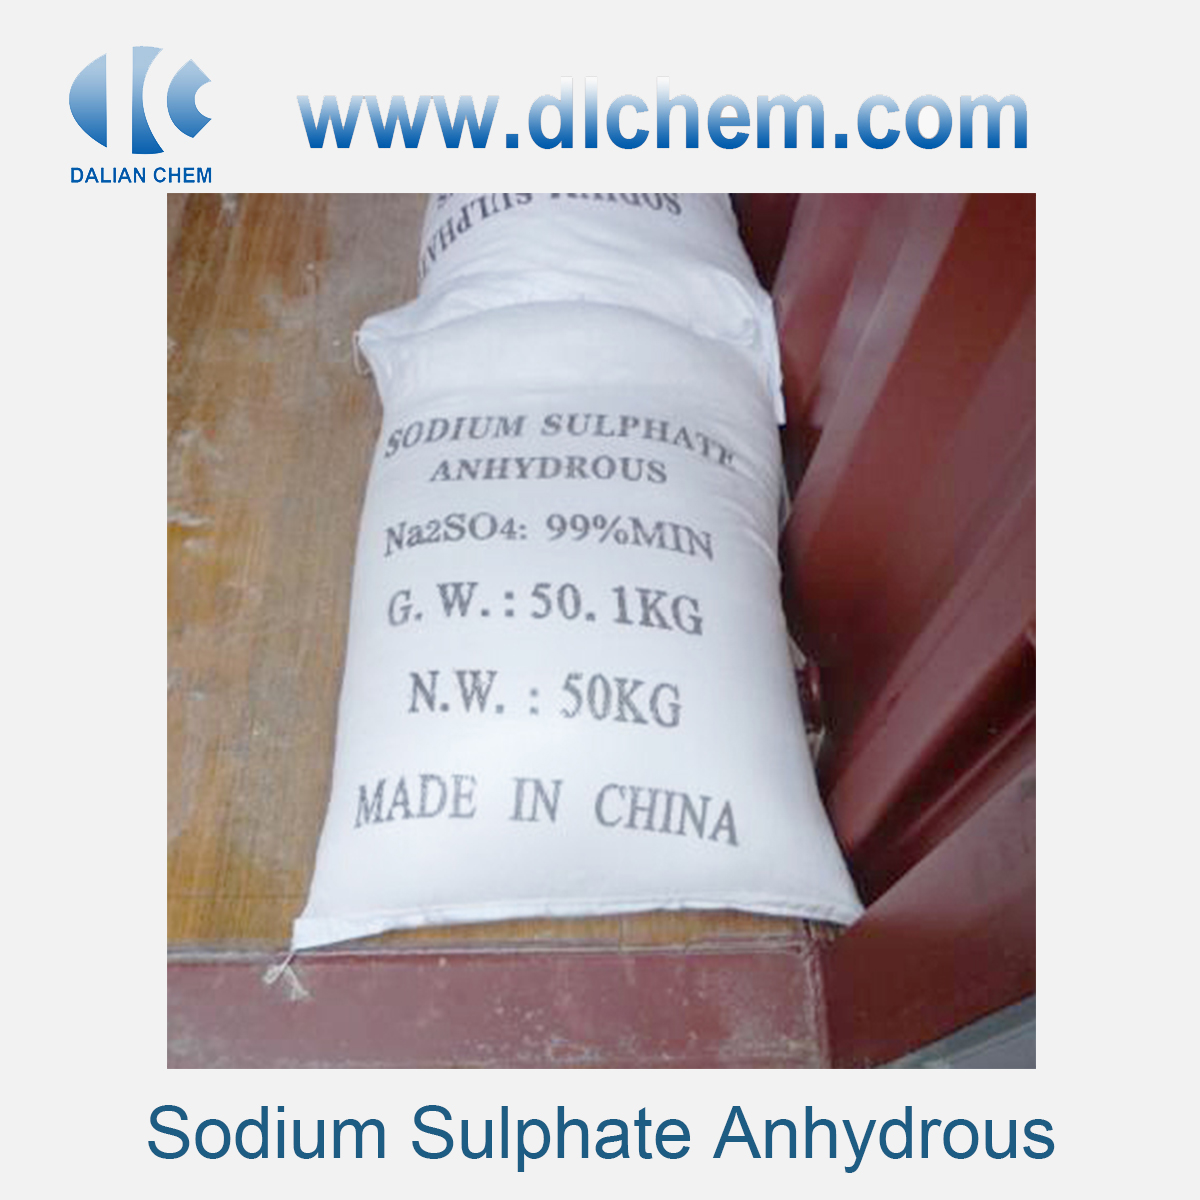 Sodium Sulphate Anhydrous CAS No. 7757-82-6